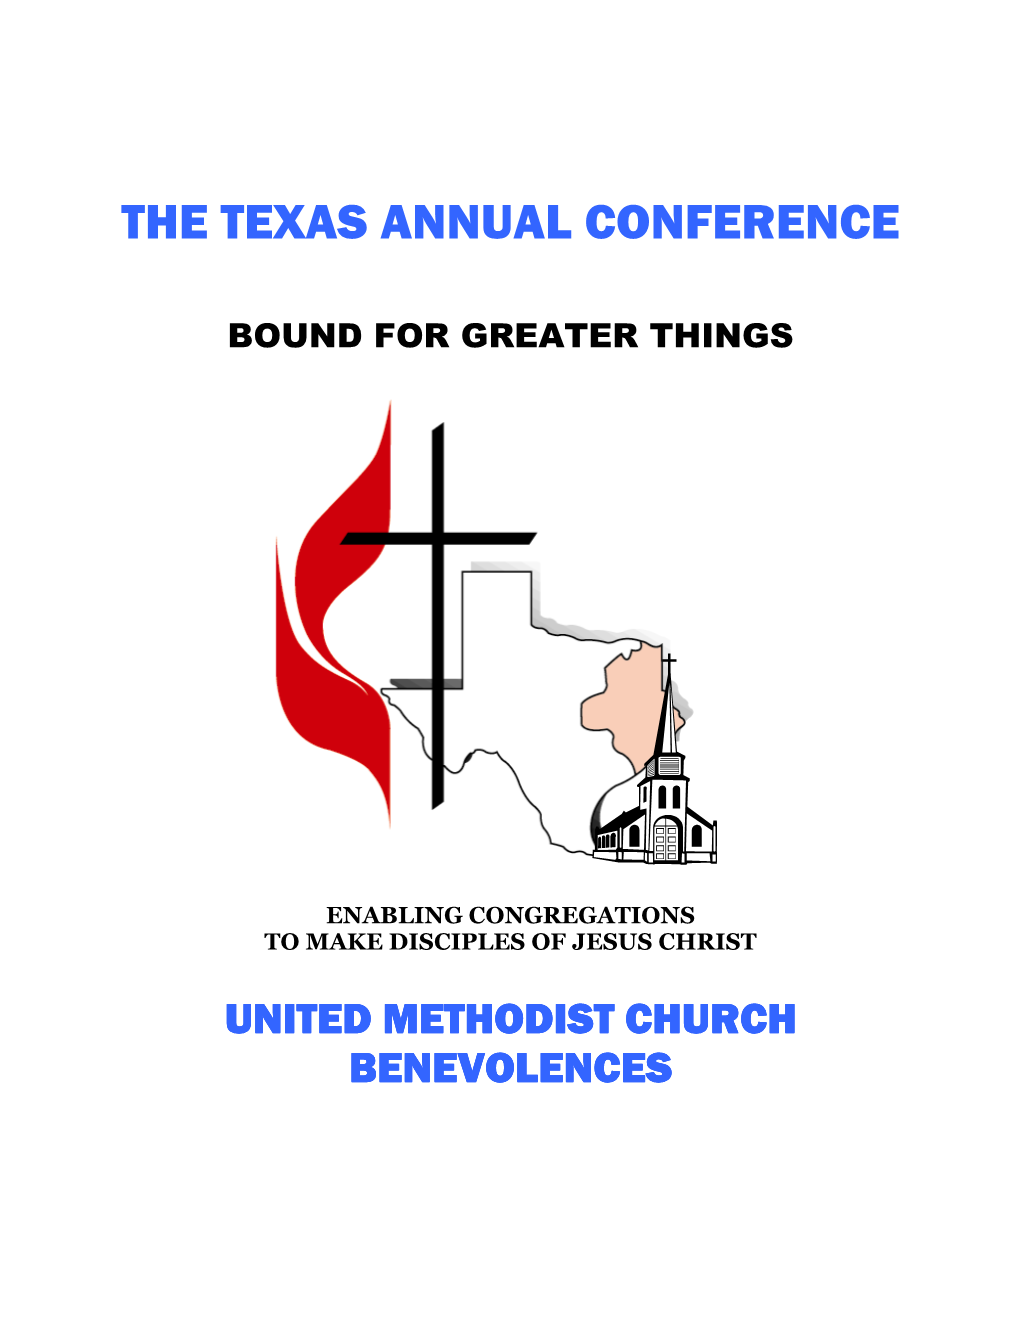 The Financial Commitment of the Texas Annual Conference